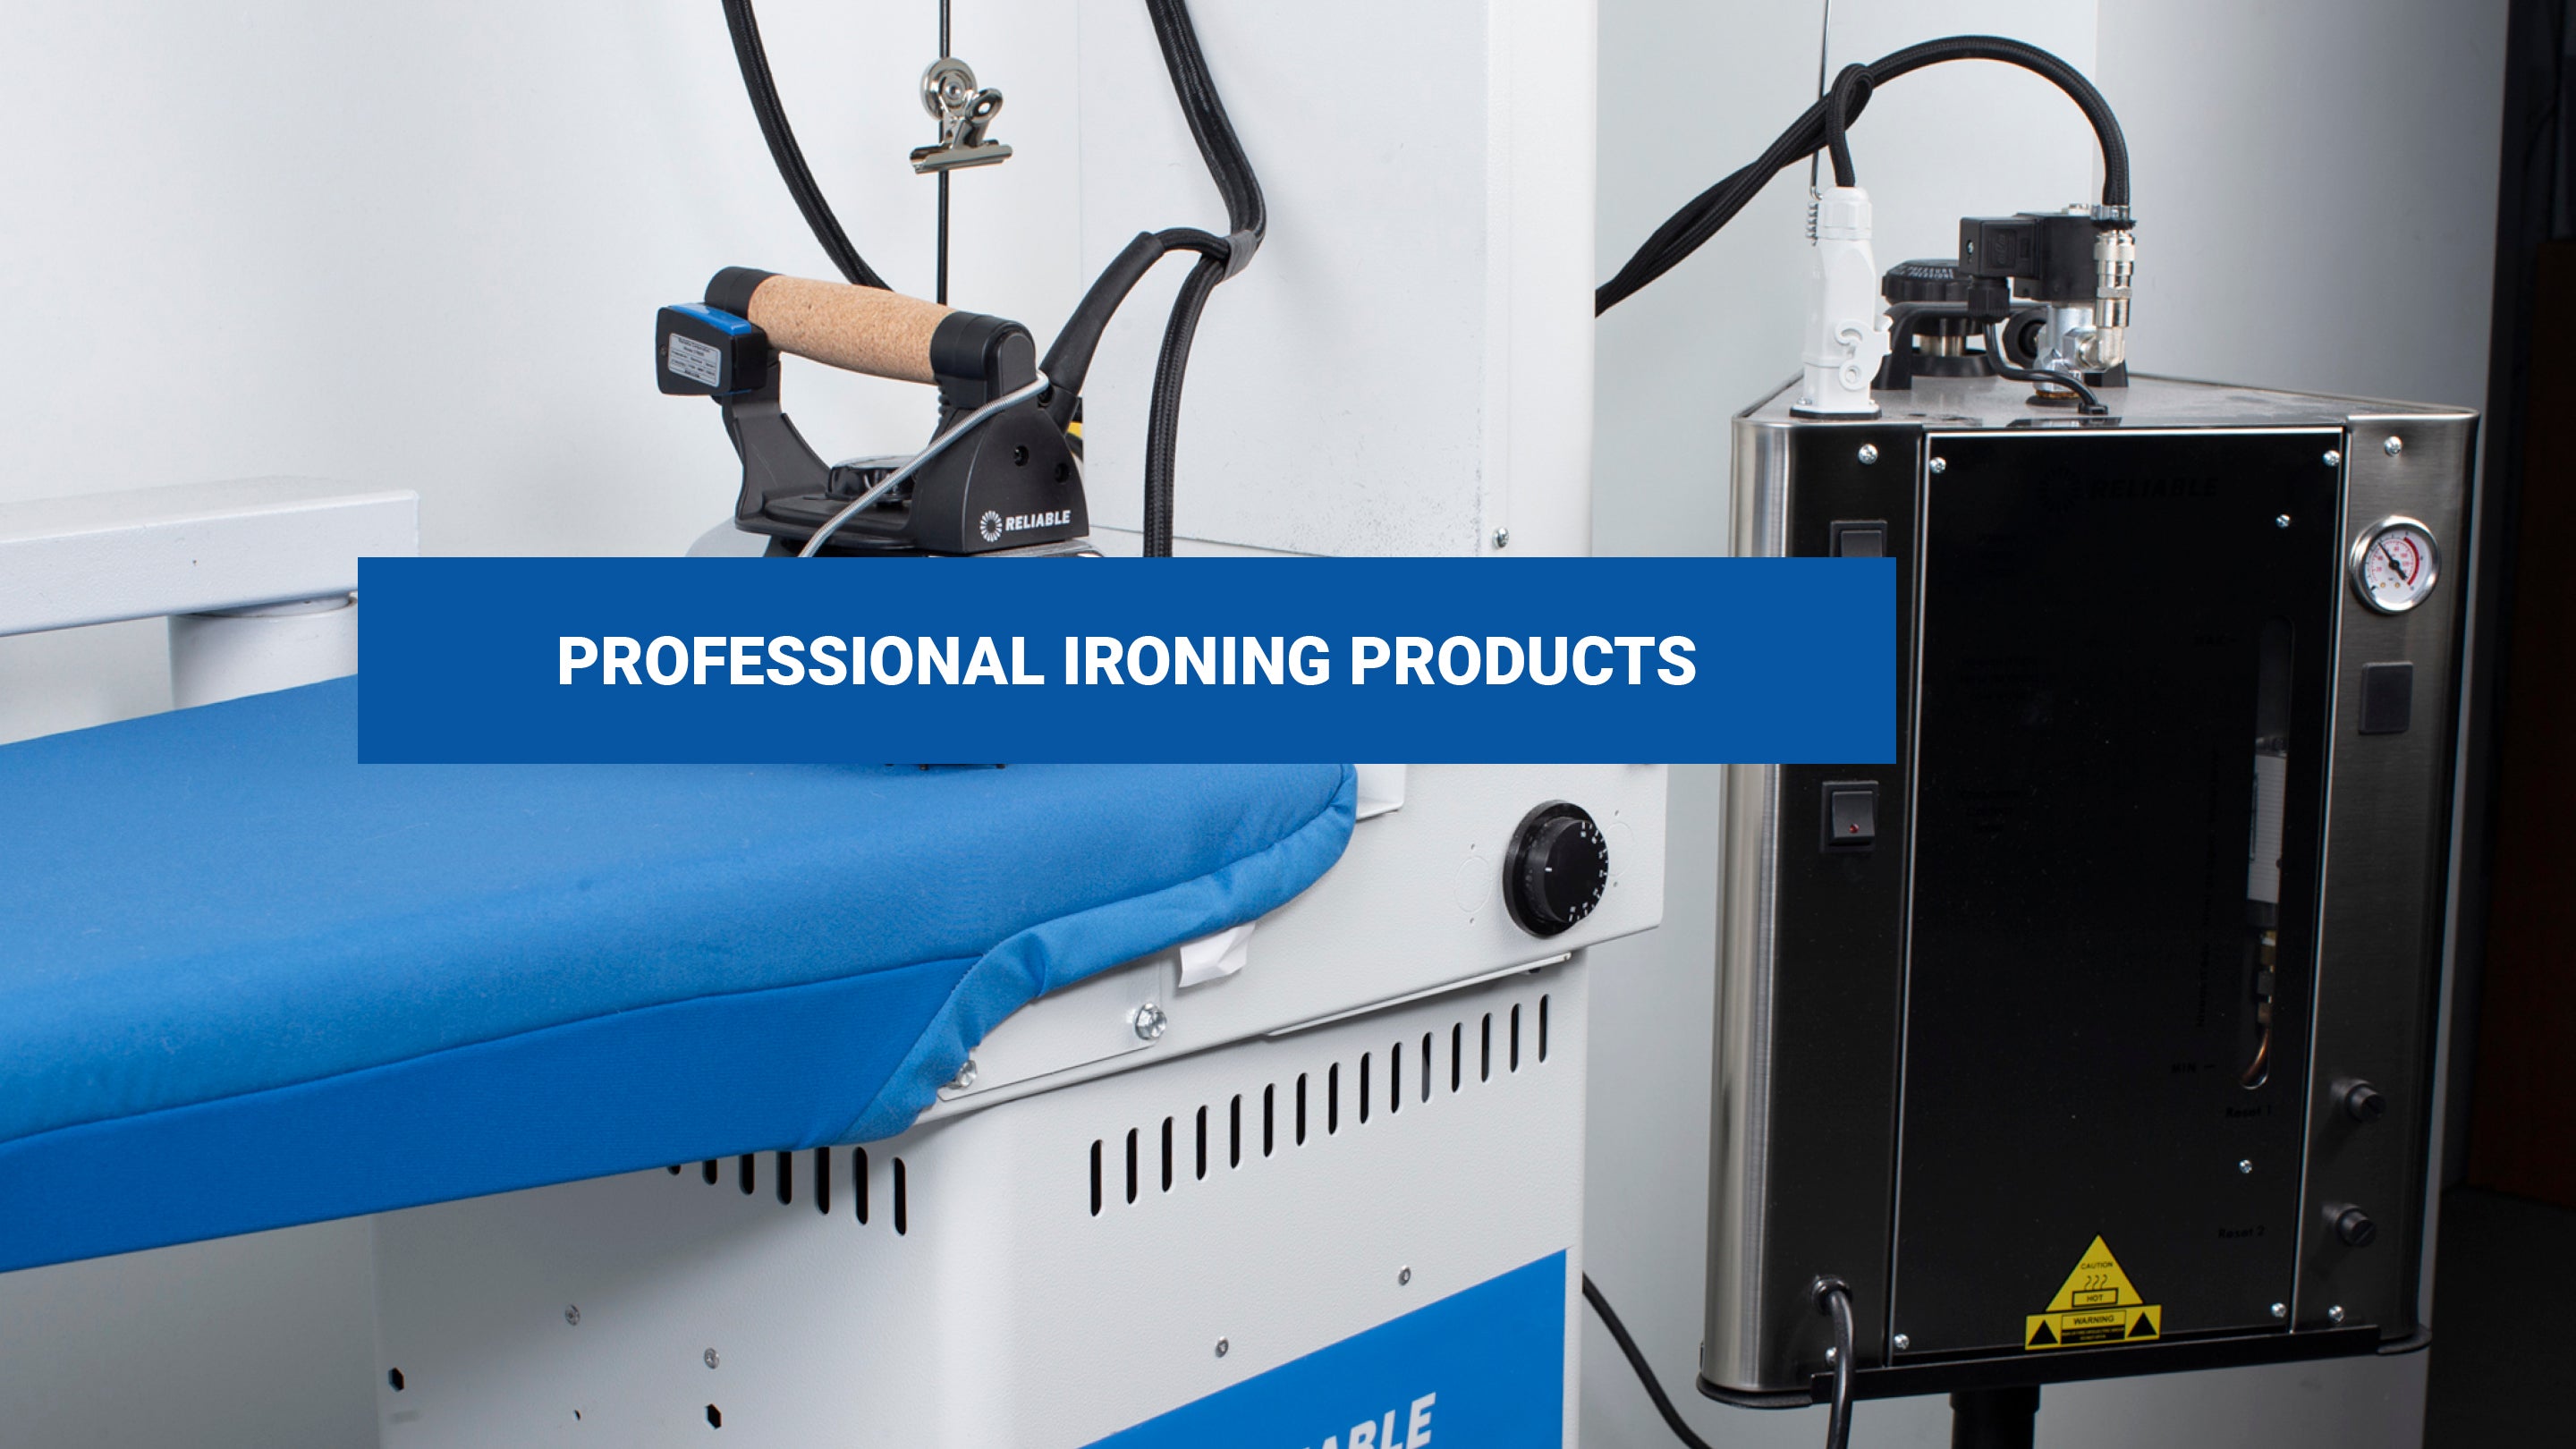 Professional Ironing Products